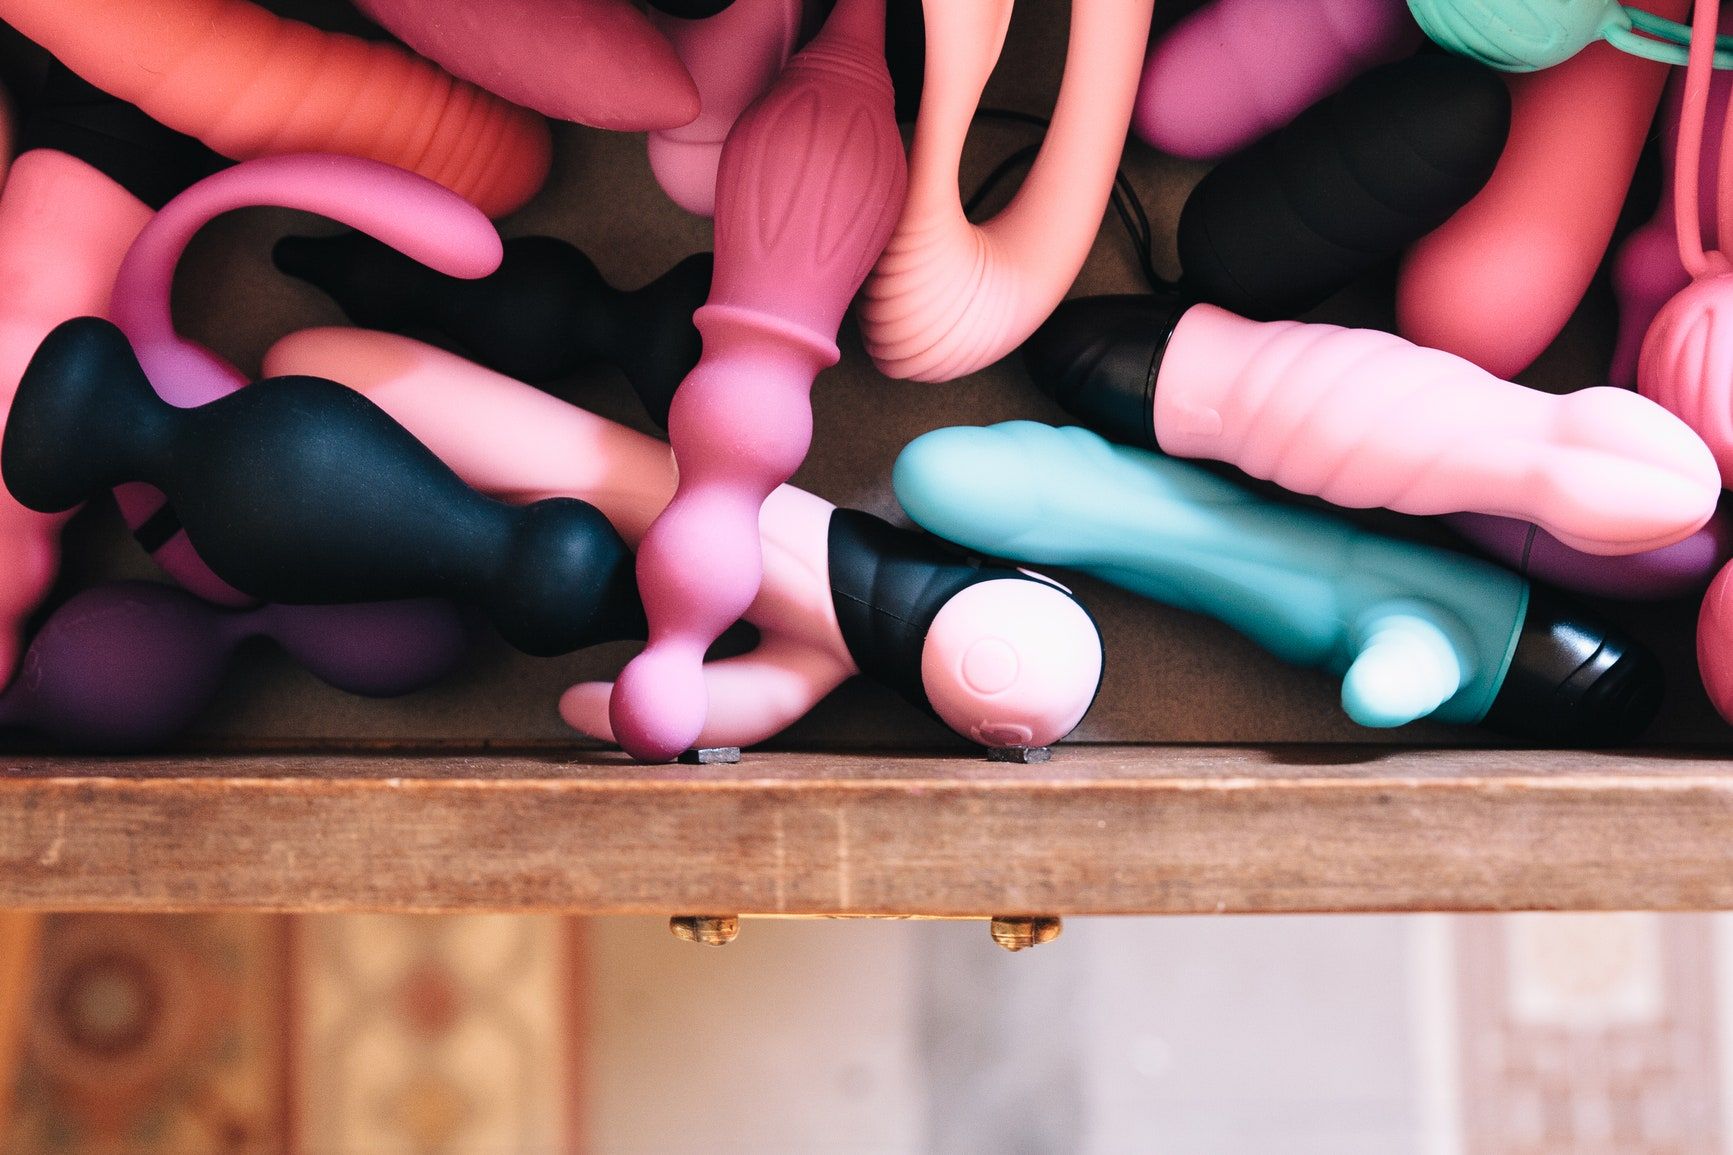 Homemade sex toys being used